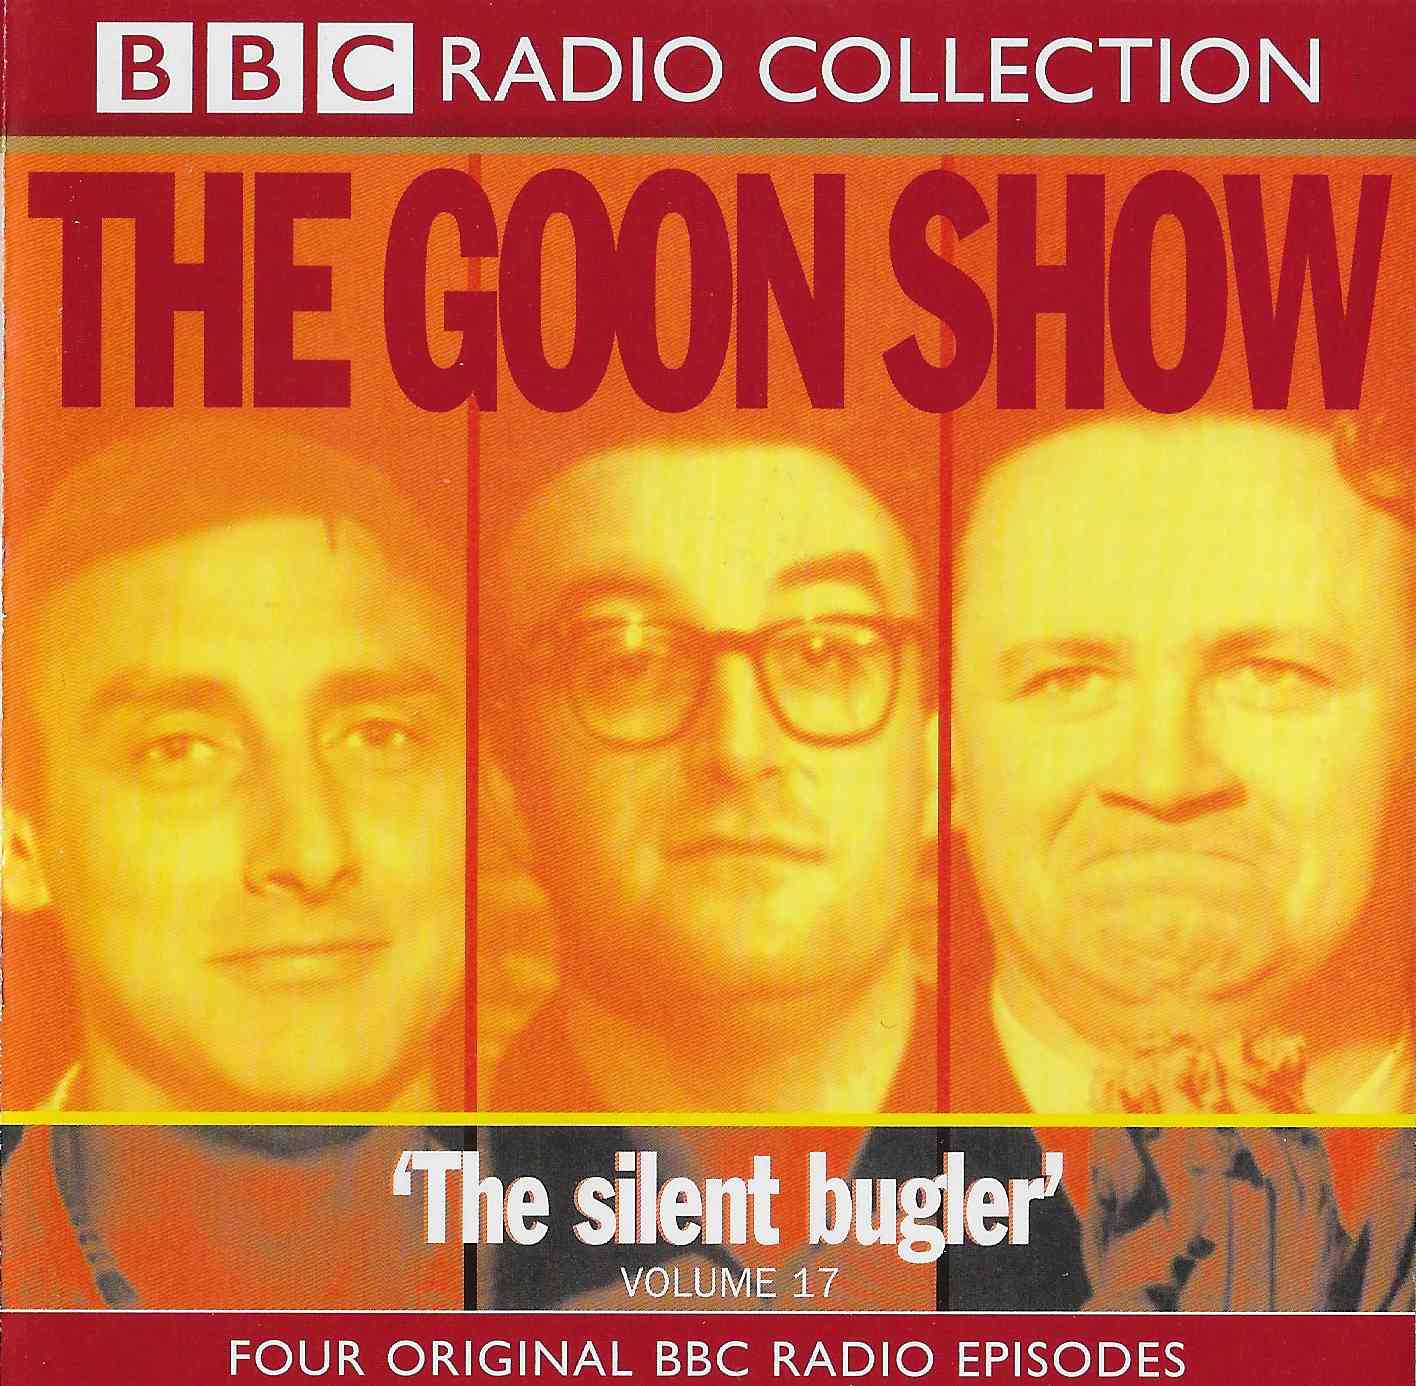 Picture of The Goon Show 17 - The silent bugler by artist Spike Milligan / Larry Stephens from the BBC cds - Records and Tapes library